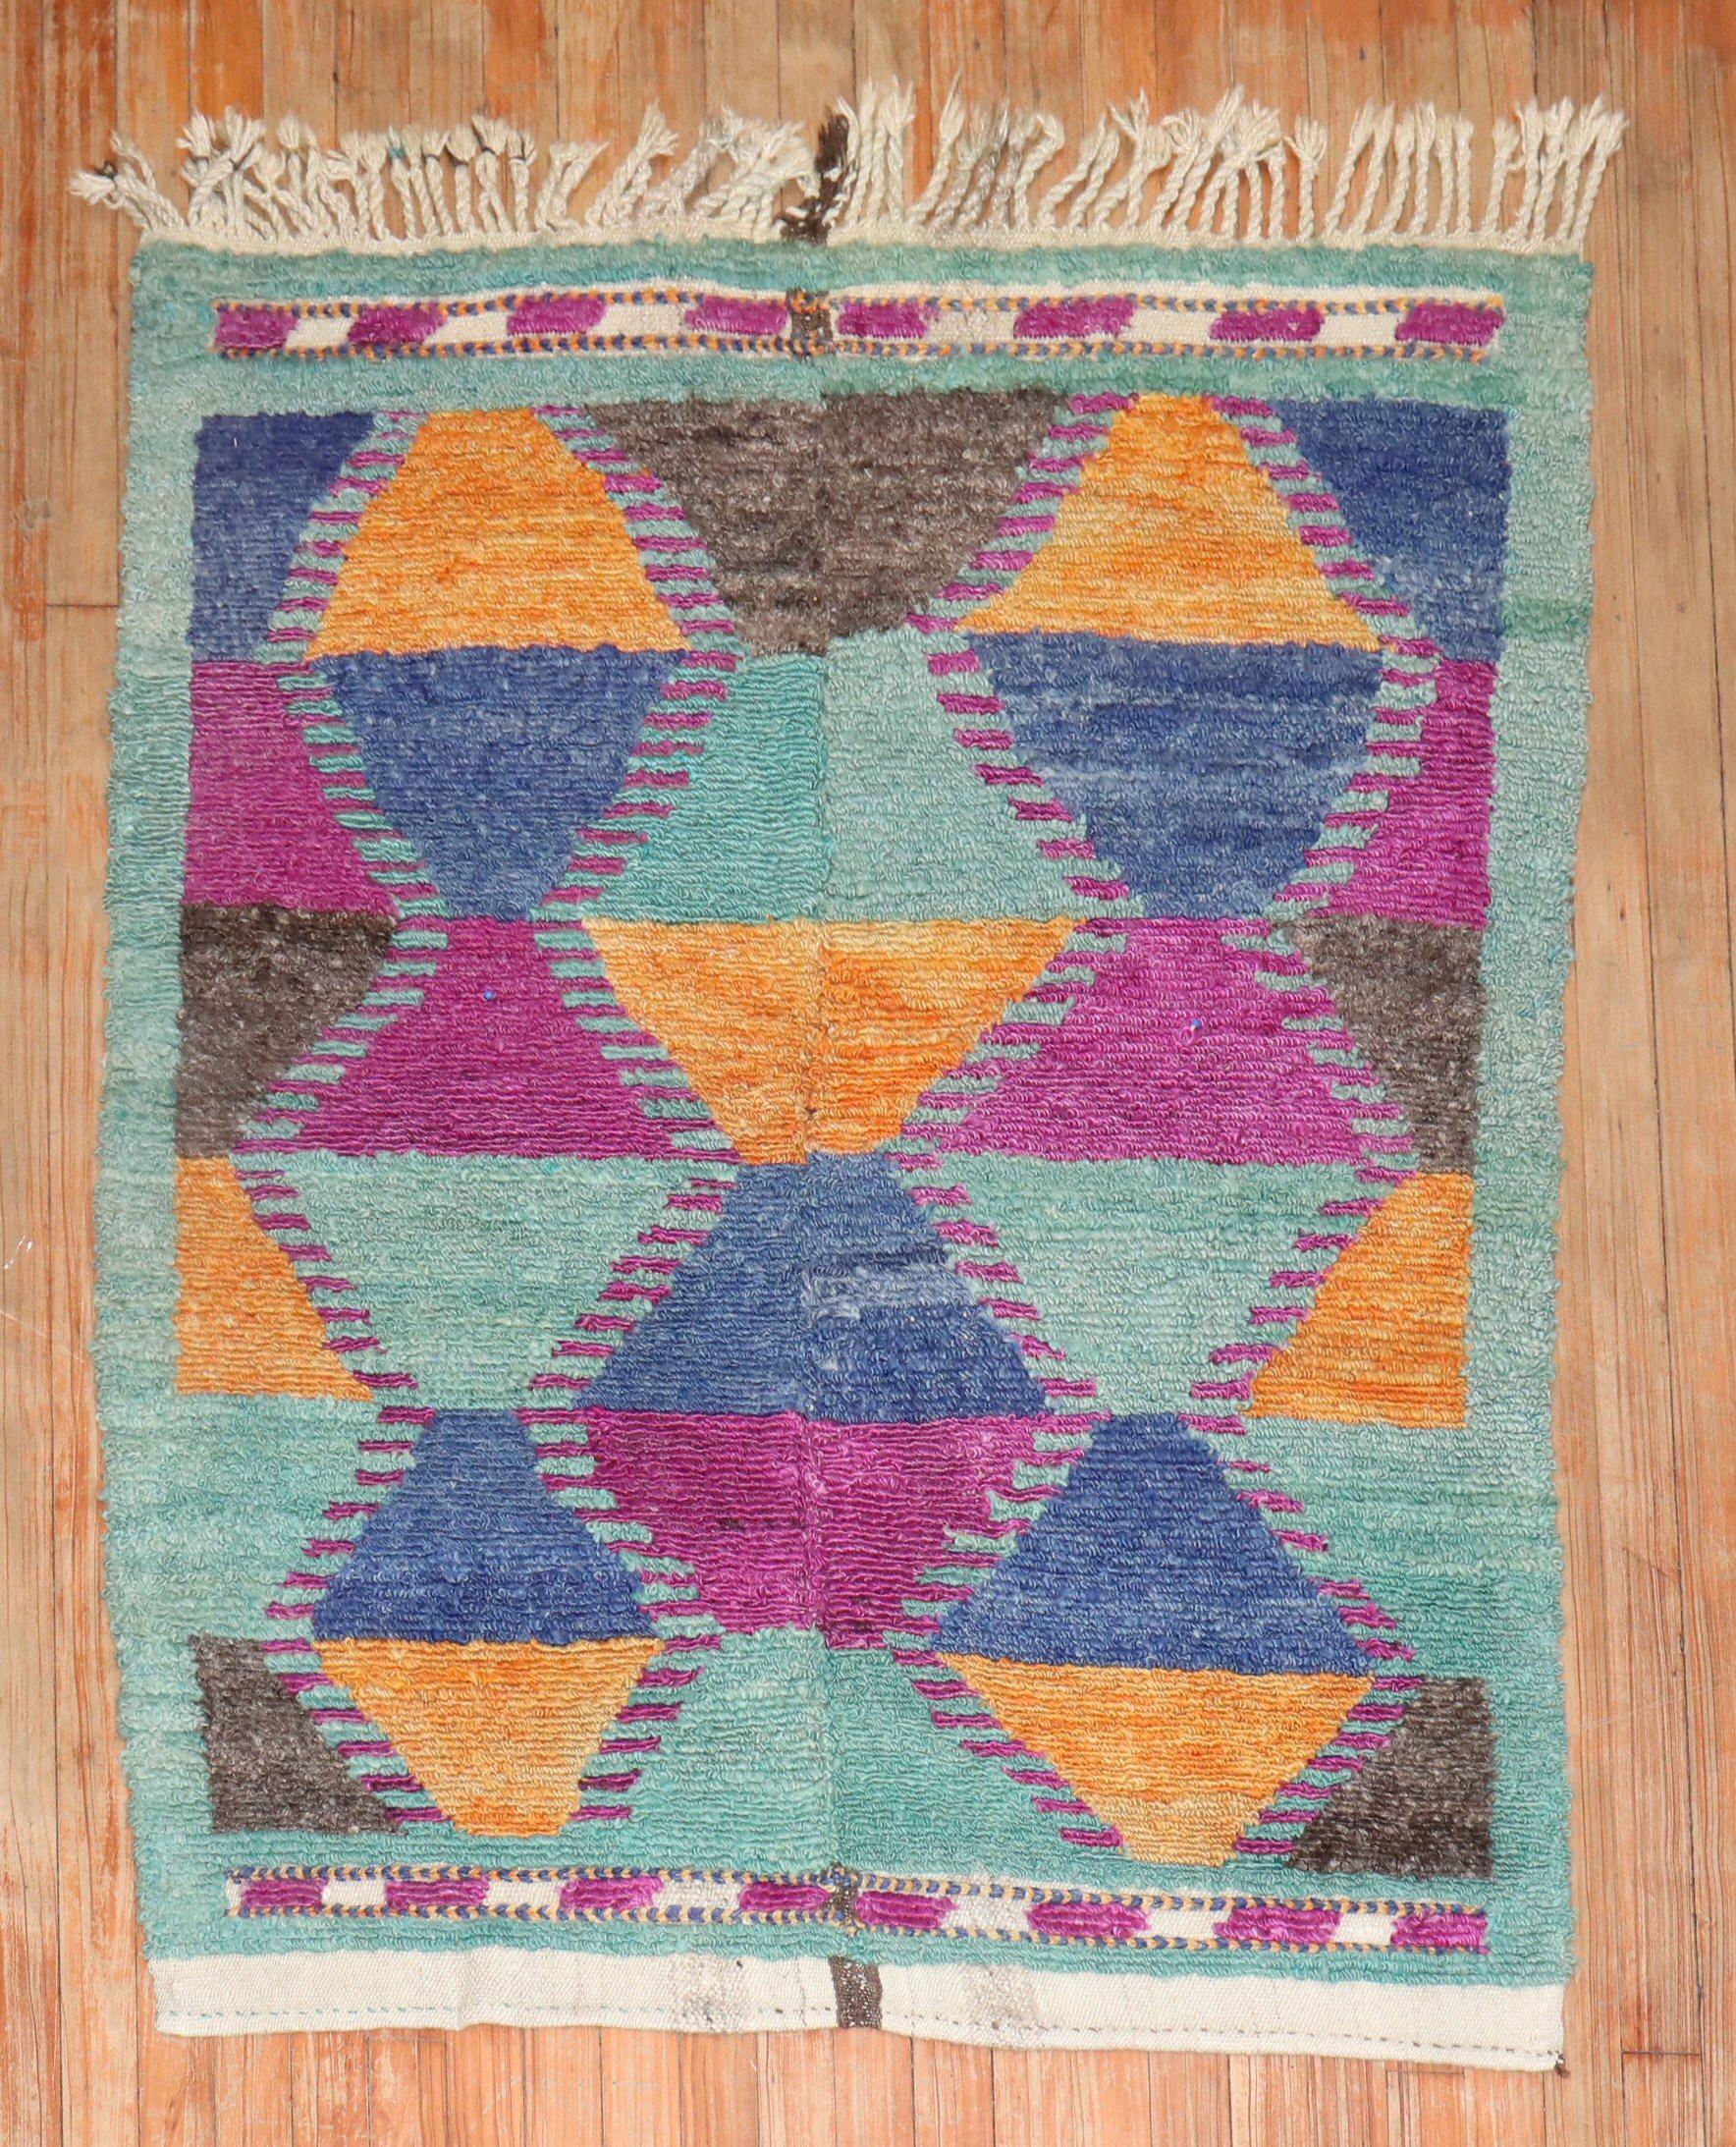 A 3rd quarter of the Century Turkish Tulu shag rug with bright funky colors.

3'7'' x 4'7''